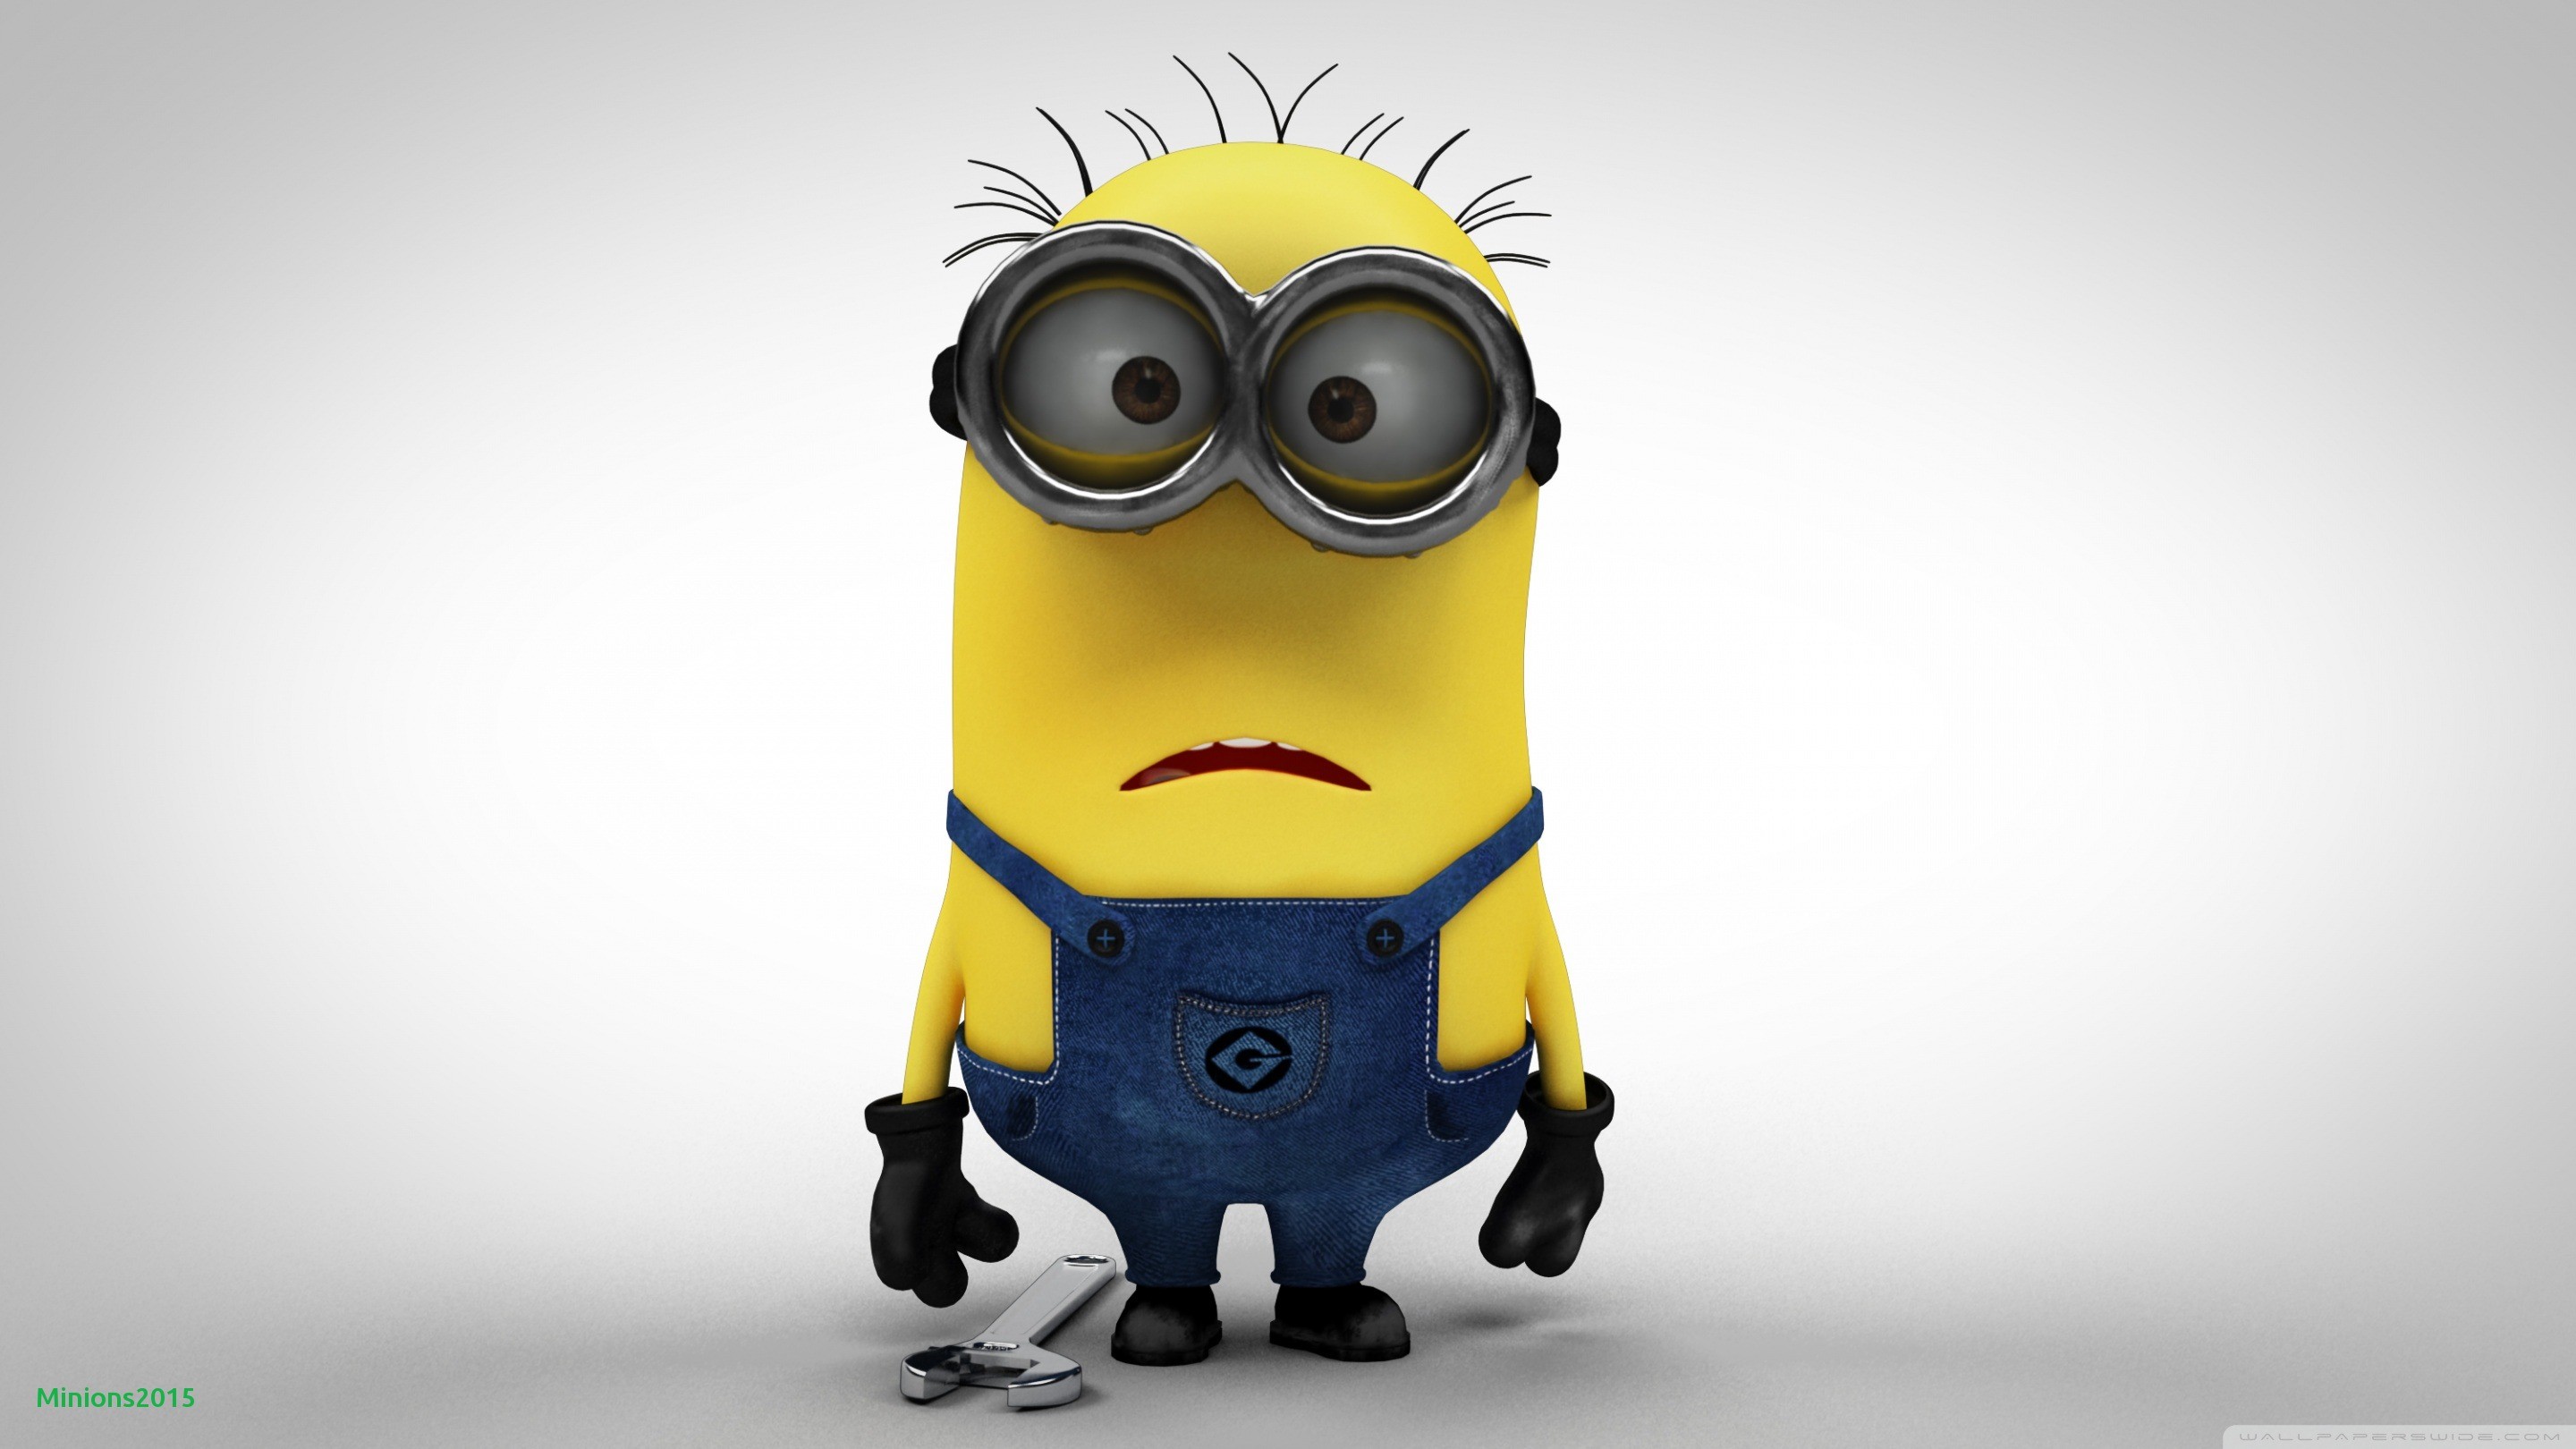 2880x1620 Best-funny-minions-wallpapers-and-backgrounds-hd Elegant Wallpaperswide Ã¢